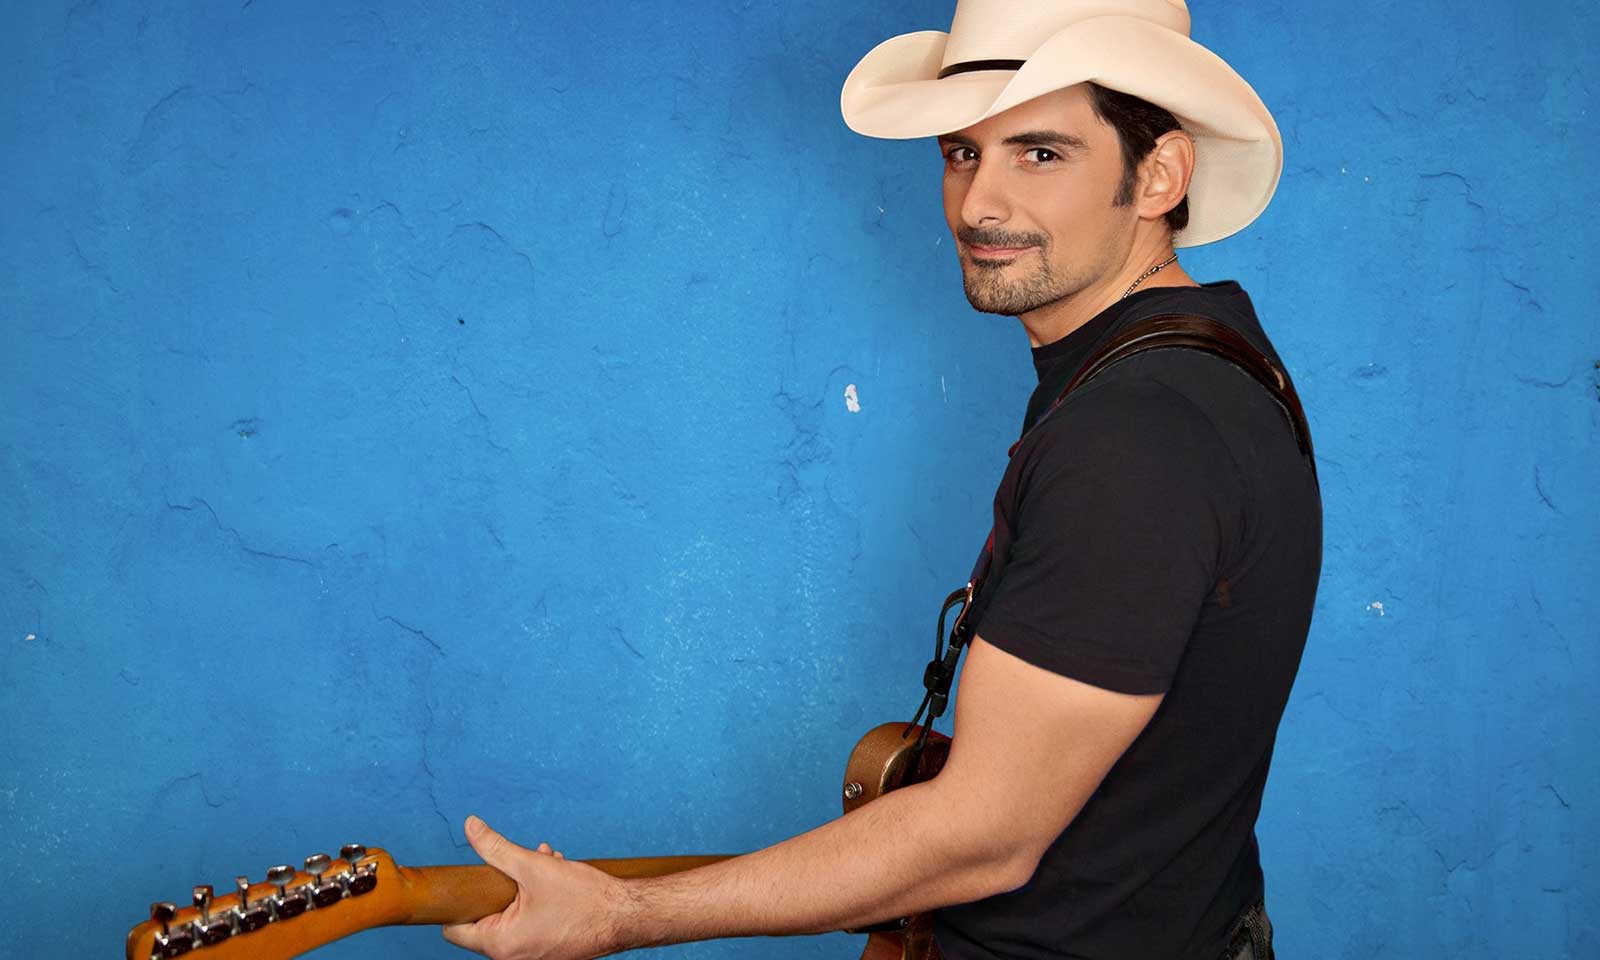 BRAD PAISLEY TAKES THE STAGE IN IRVINE